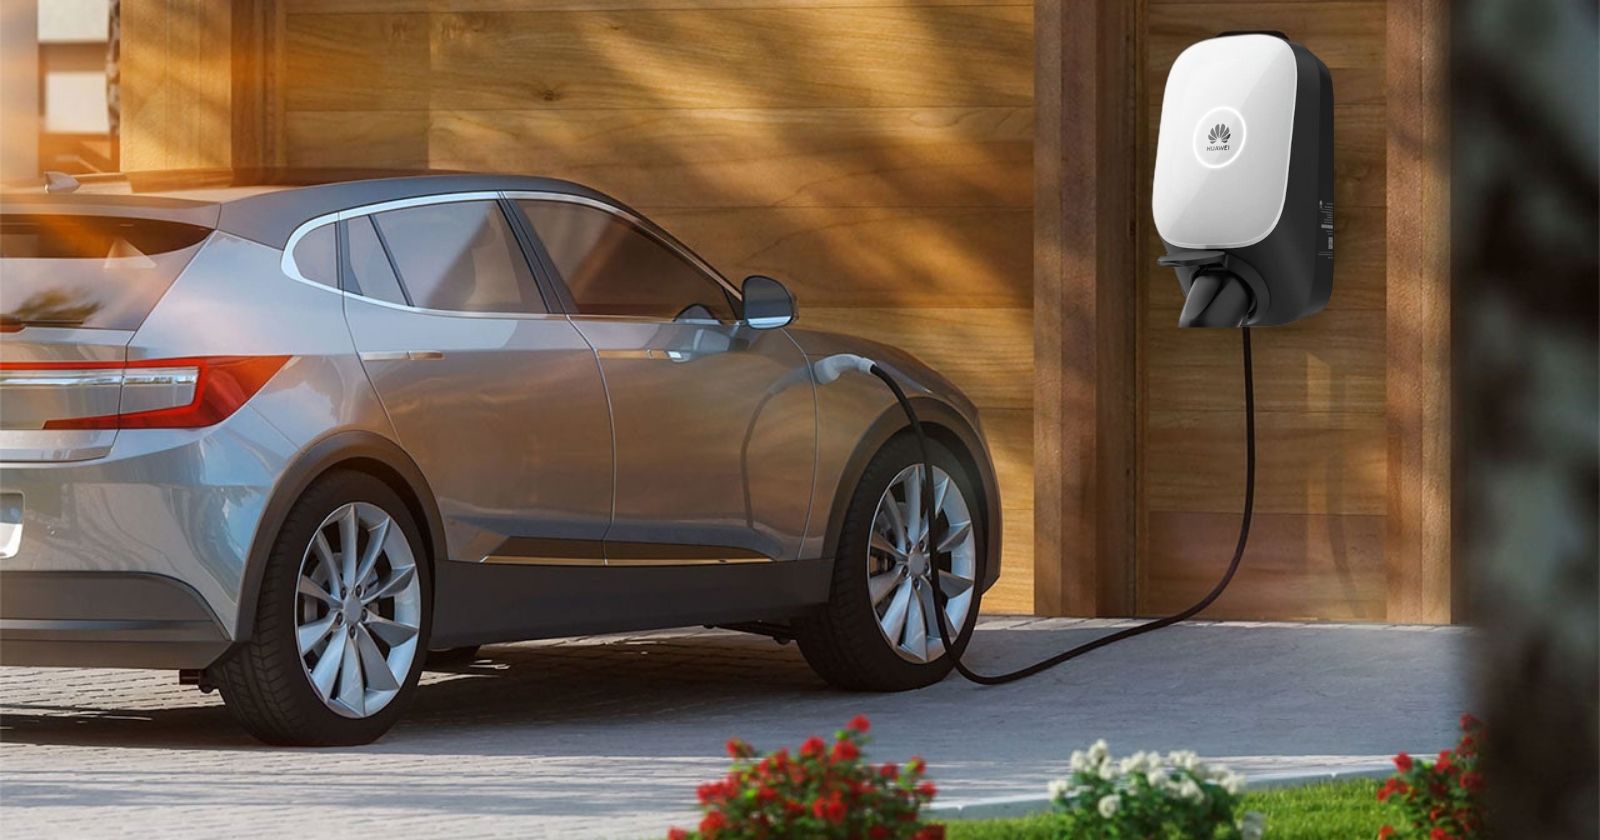 New unit from Huawei that can charge Tesla in 5 minutes!